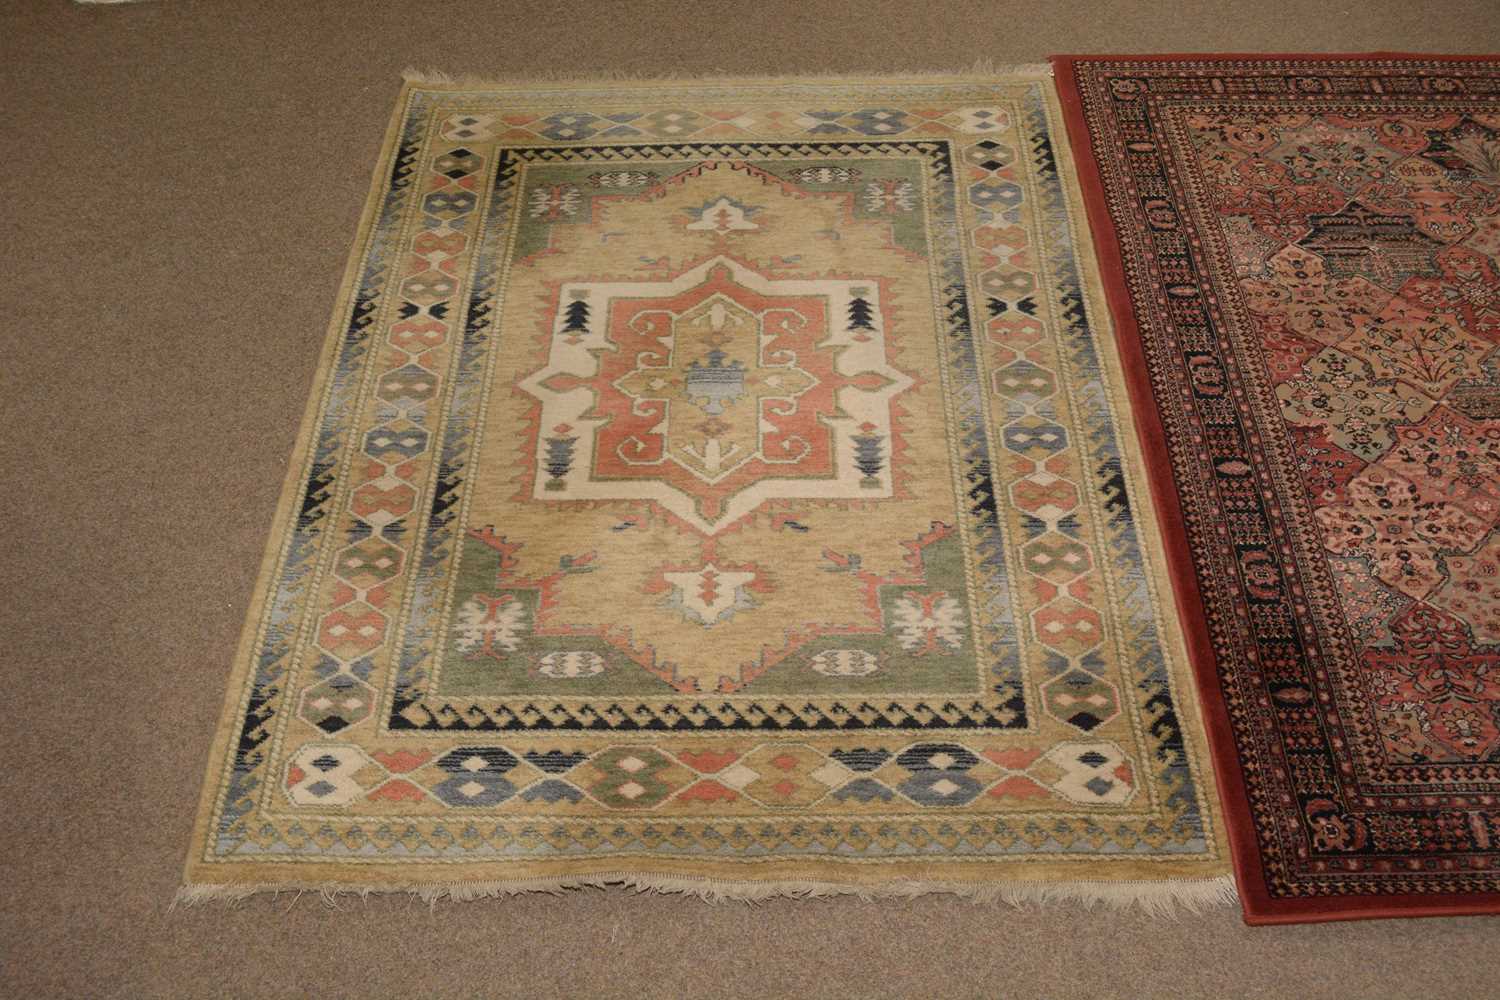 A 20th Century Persian style rug from John Lewis with another - Image 3 of 5